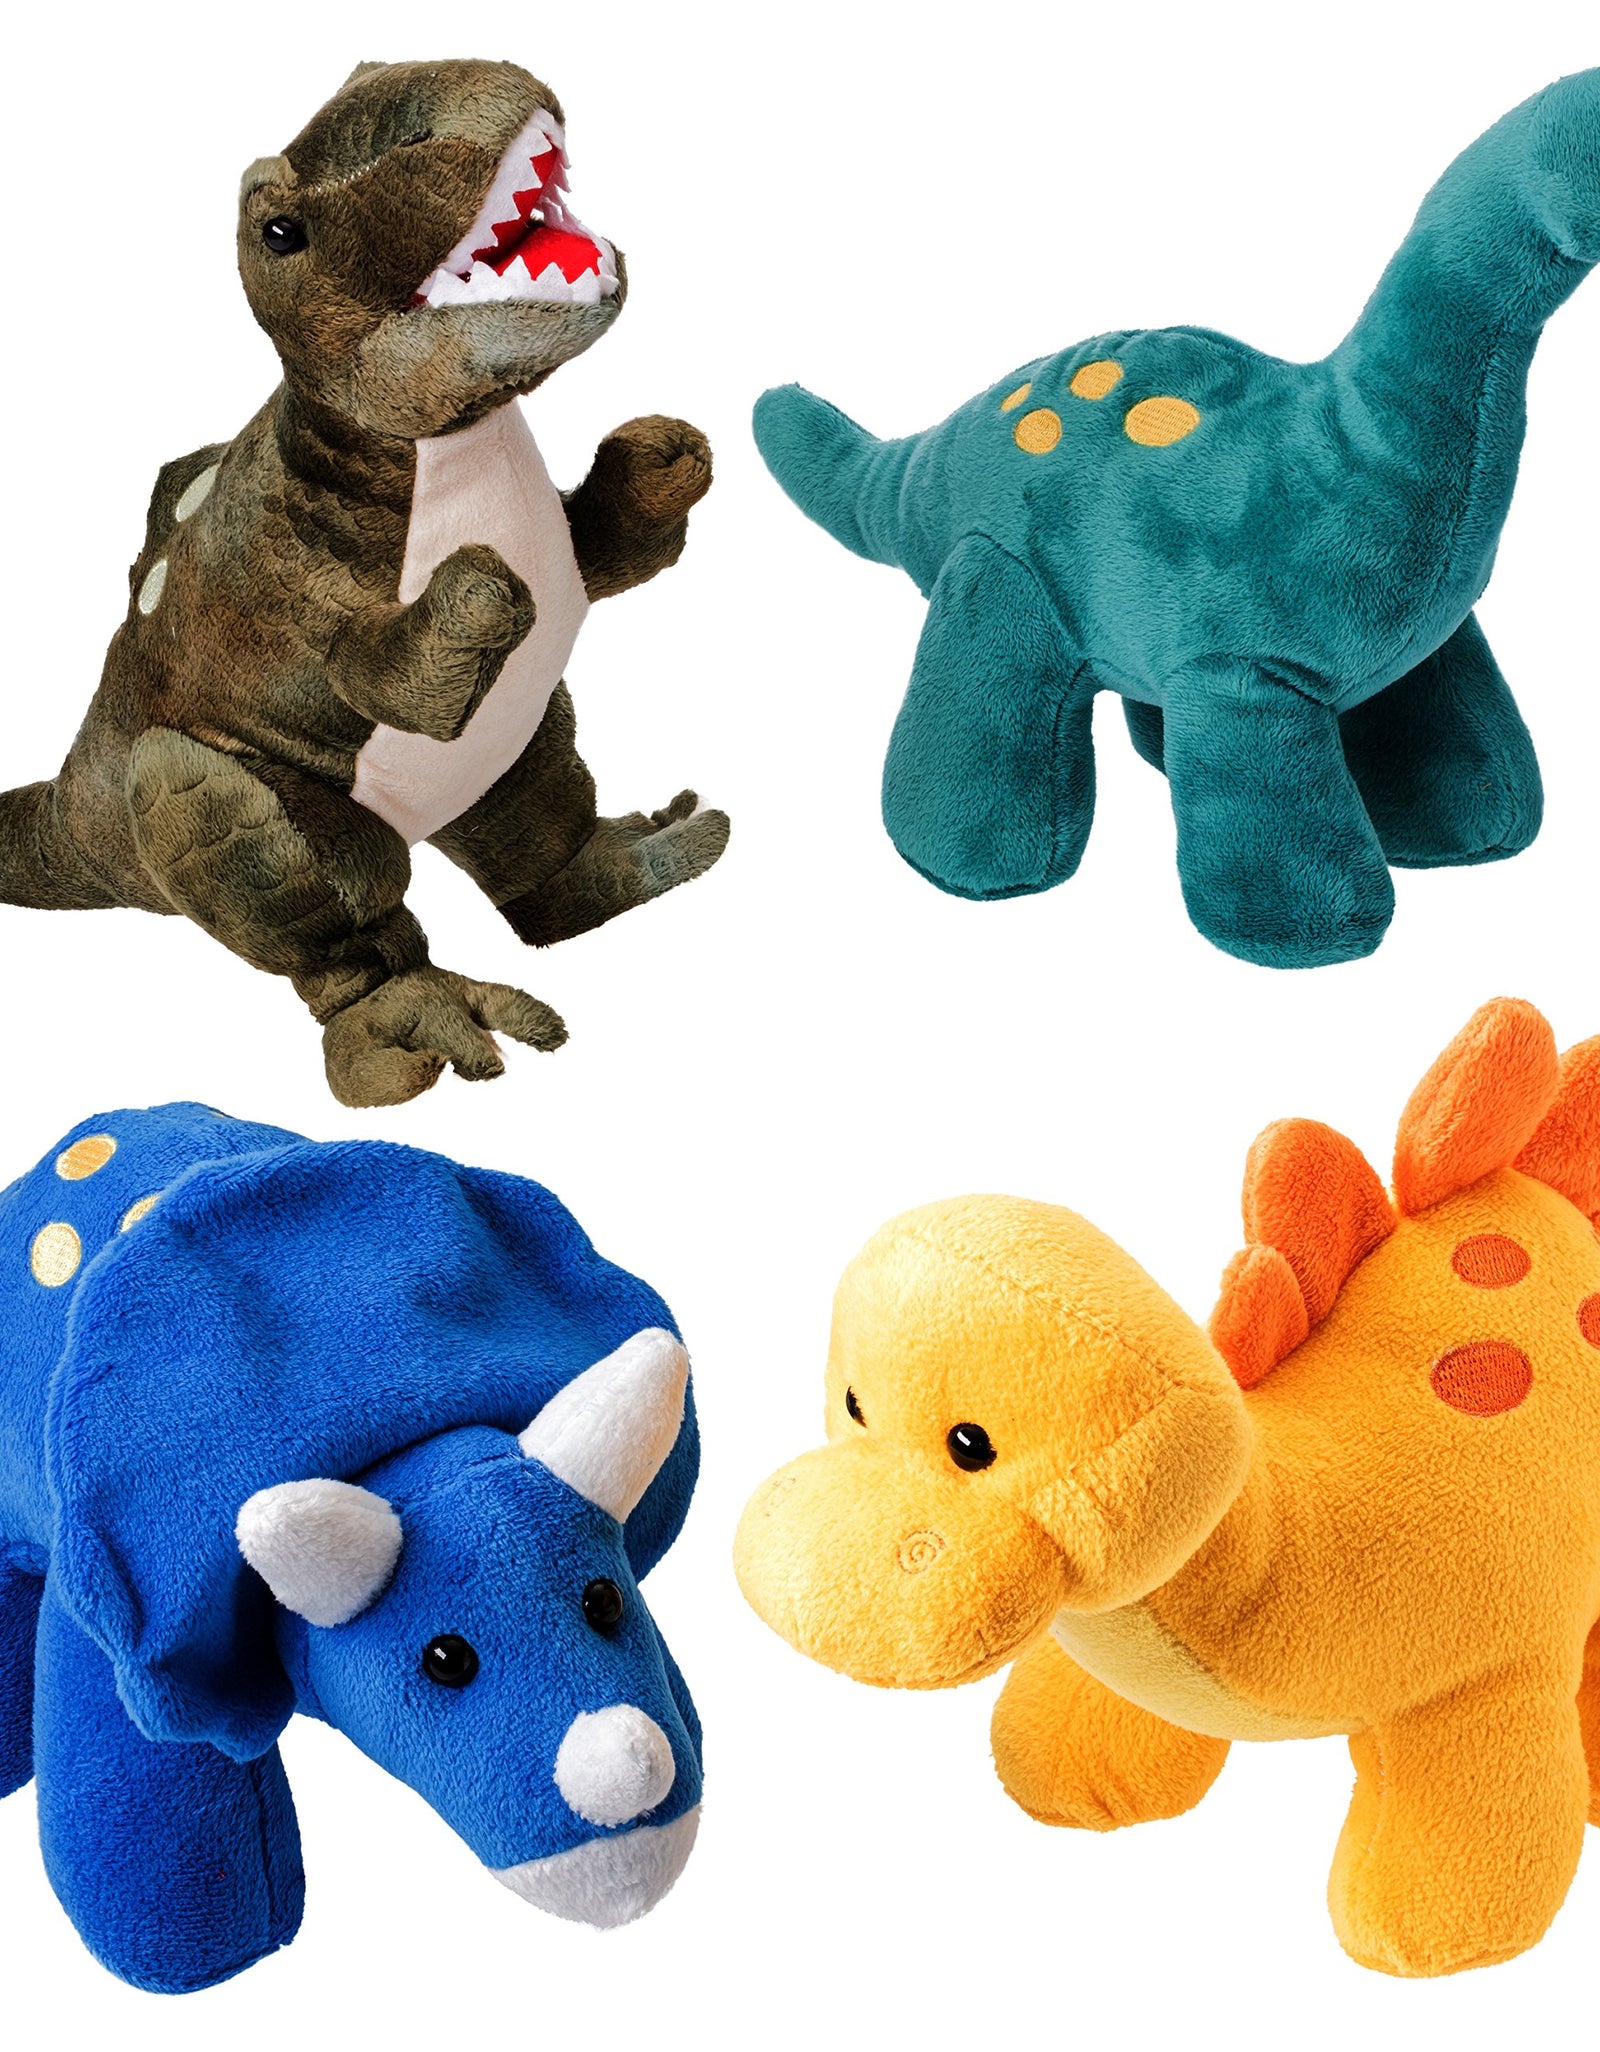 Prextex Plush Dinosaurs 4 Pack 10'' Long Great Gift for Kids Stuffed Animal Assortment Great Set for Kids